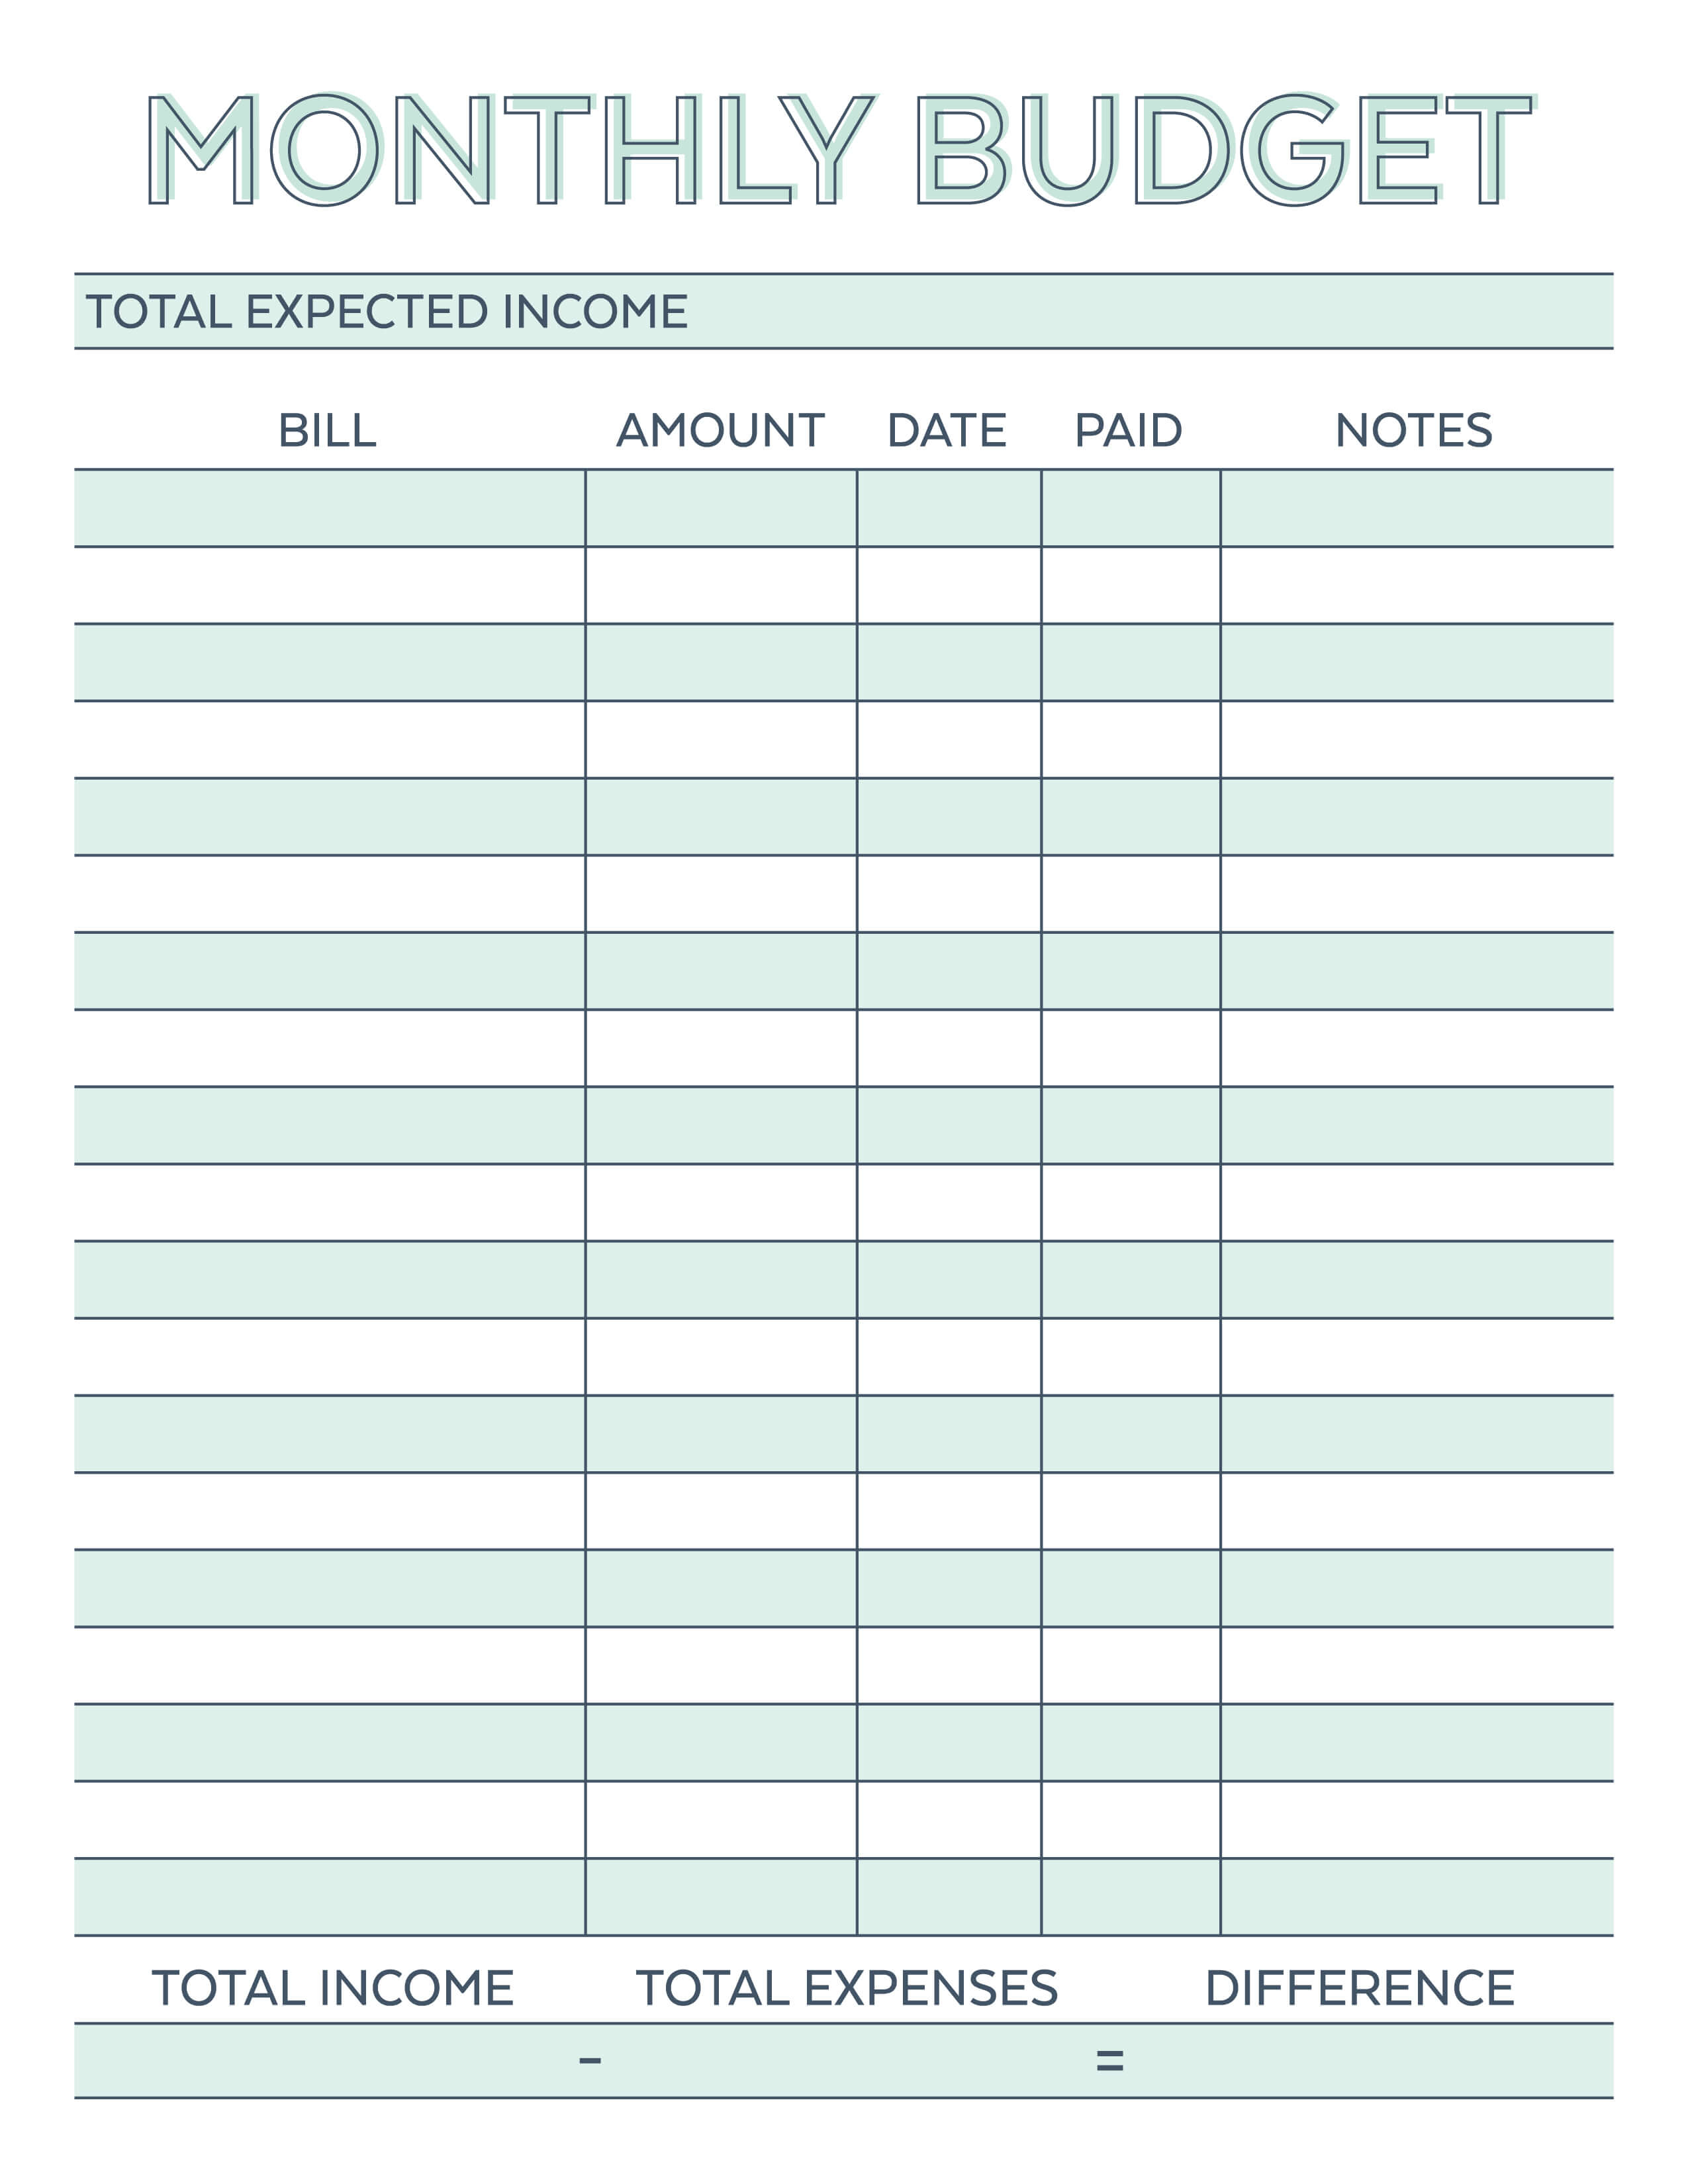 Monthly Budget Planner - Free Printable Budget Worksheet - Free Printable Monthly Expense Sheet